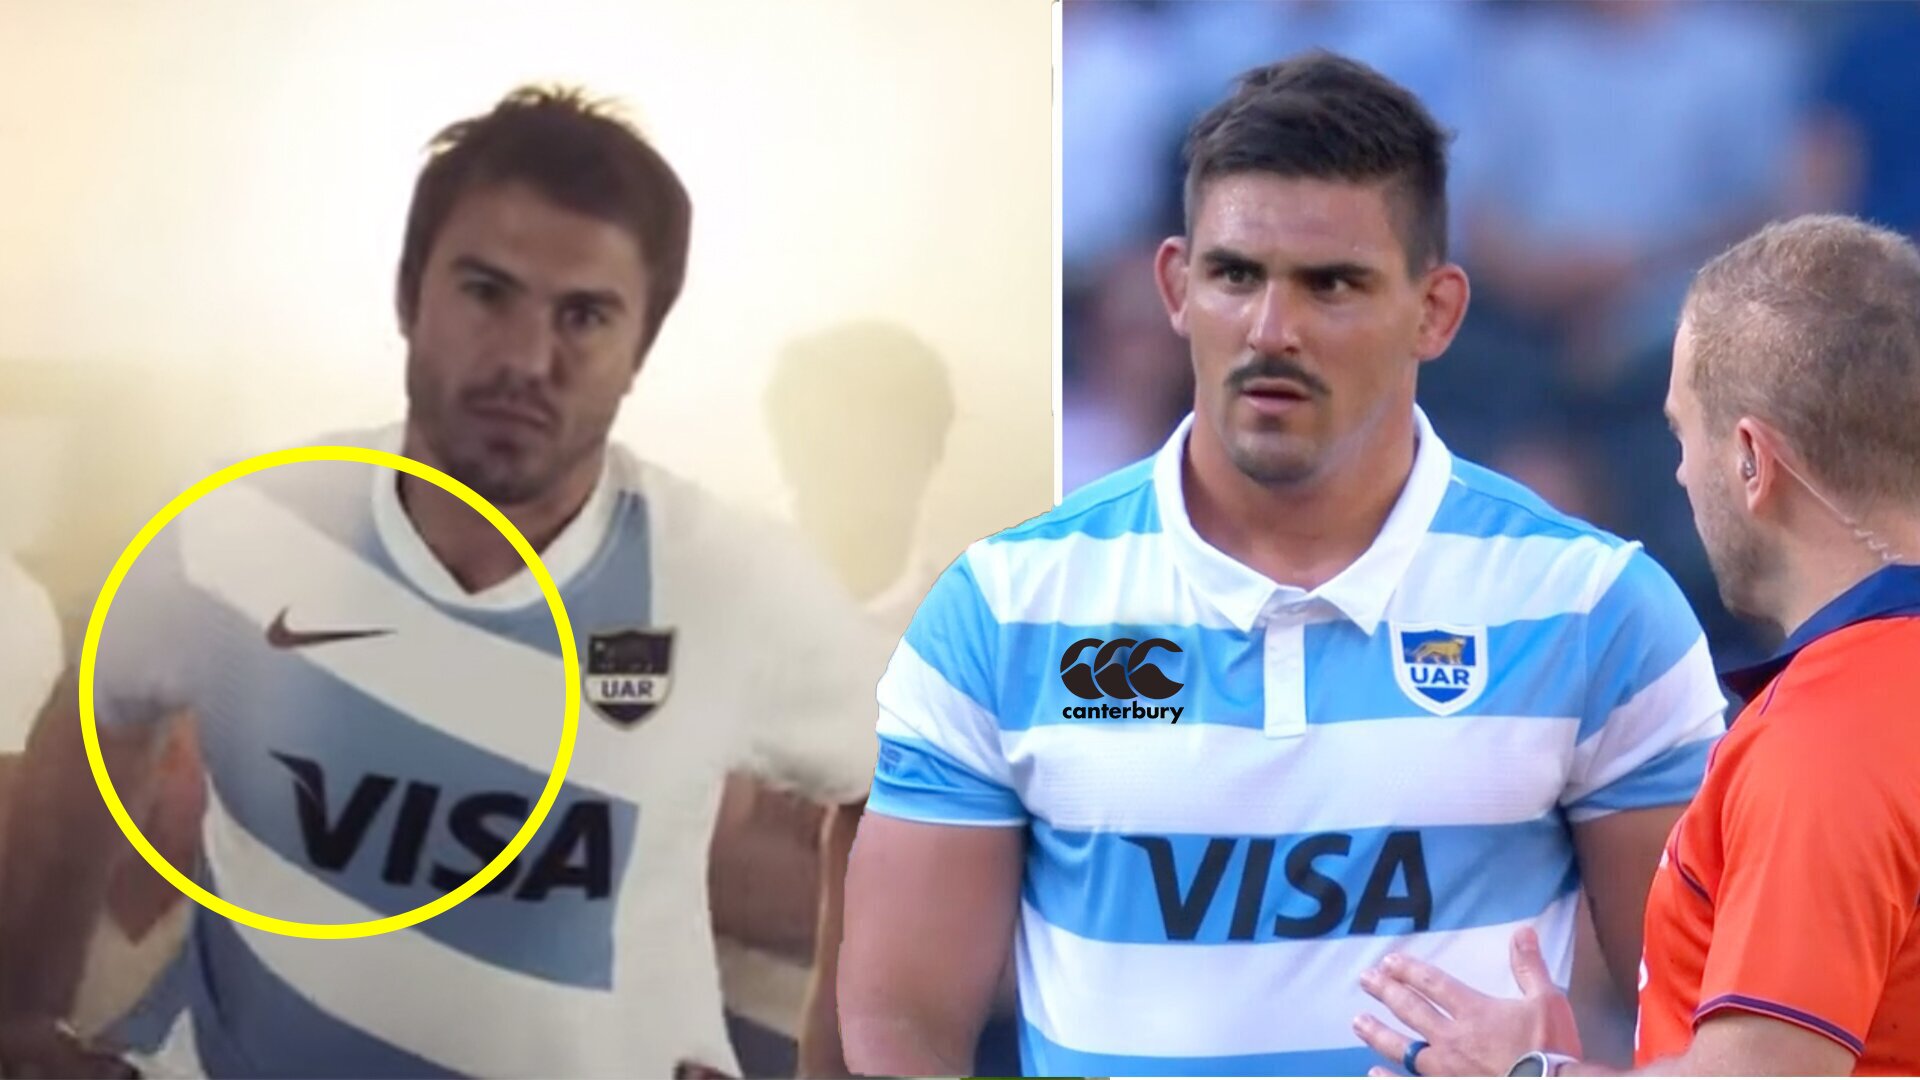 Nike set to drop Argentina rugby amid social media scandal - reportedly replaced by Canterbury